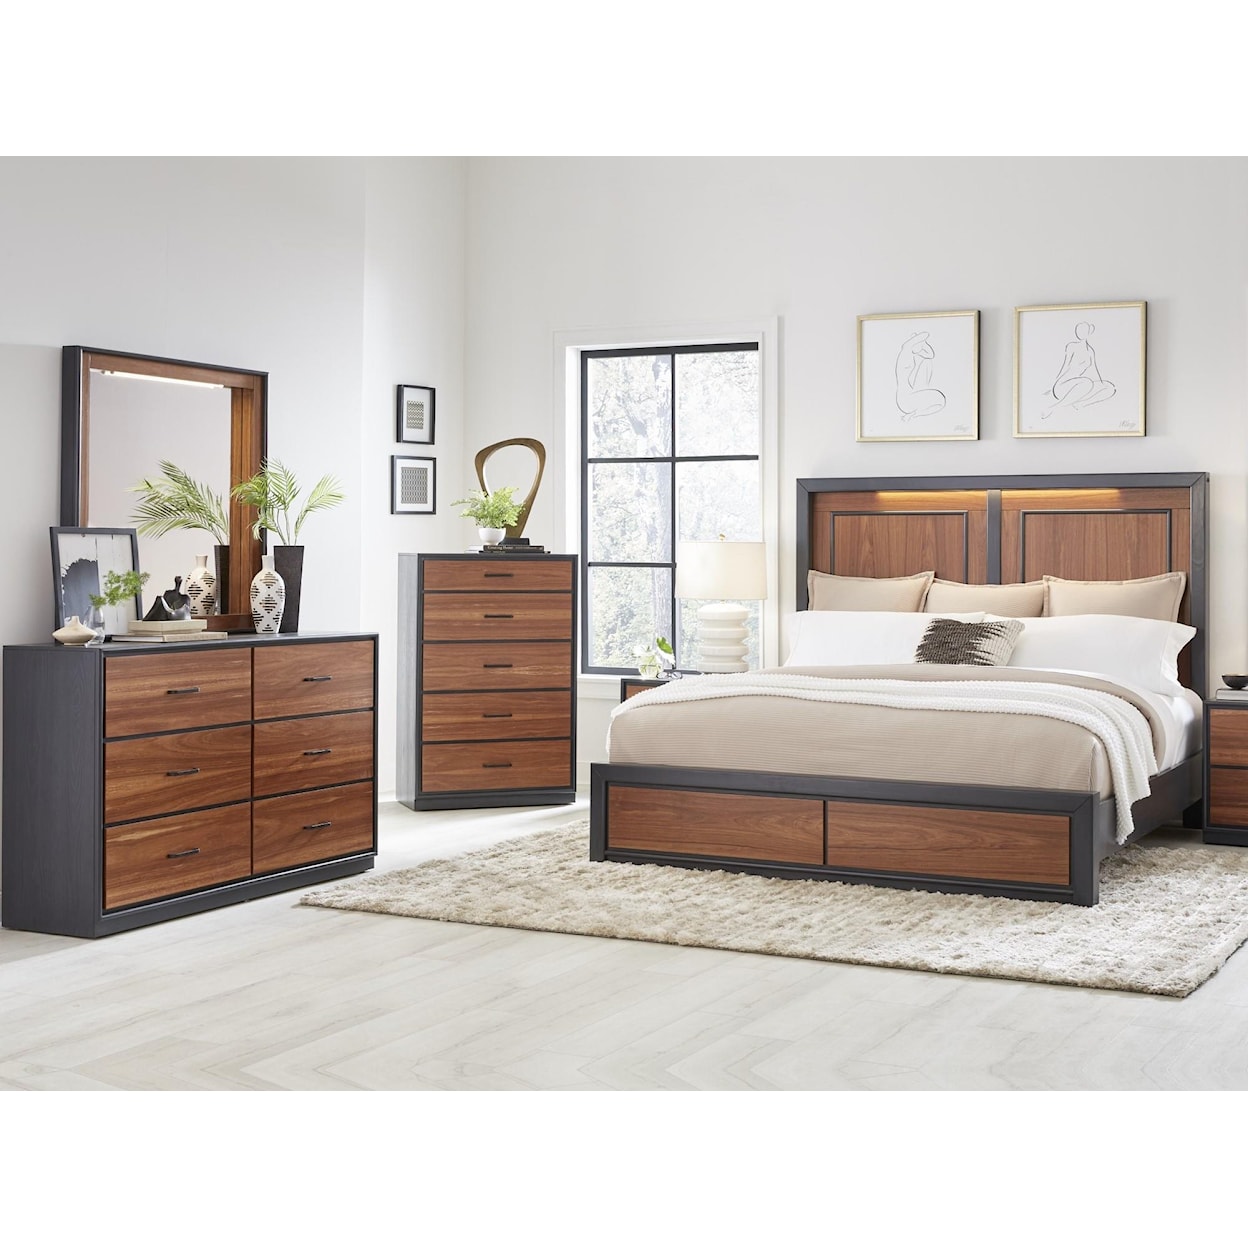 Lifestyle Madison Queen 5 Pc Bedroom Group